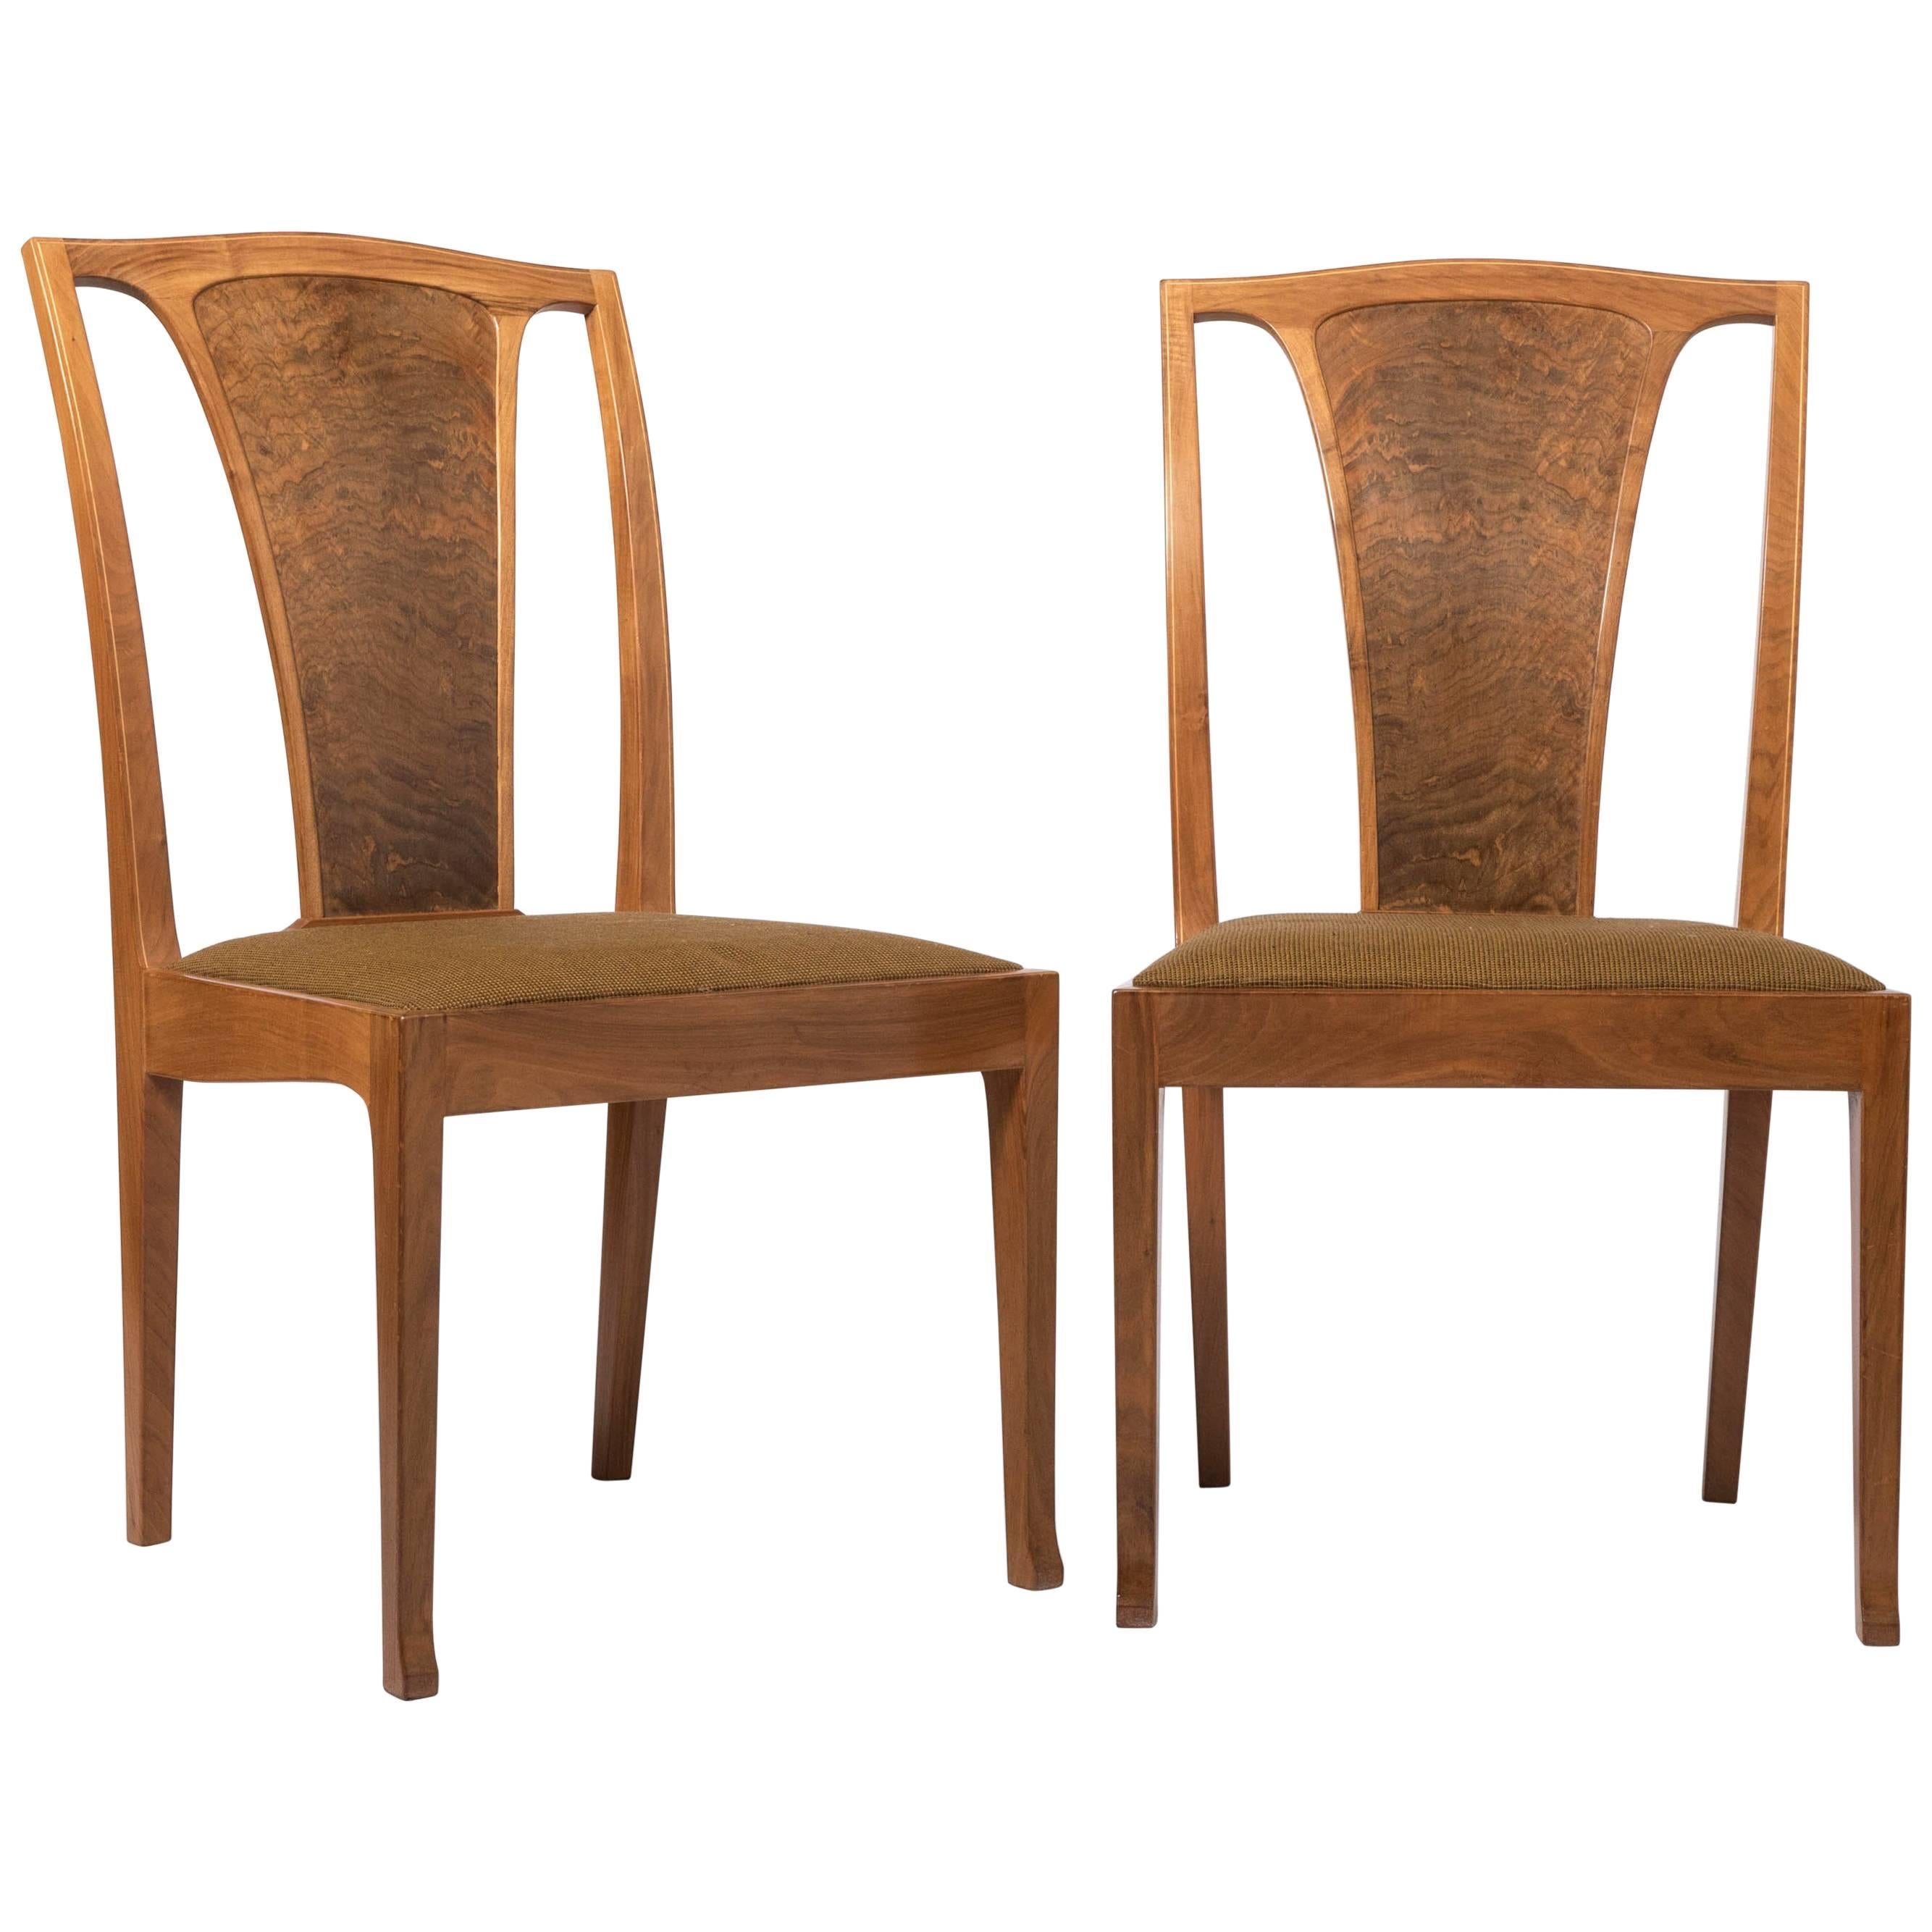 Pair of English Walnut Chairs by Edward Barnsley, England, circa 1969 For Sale